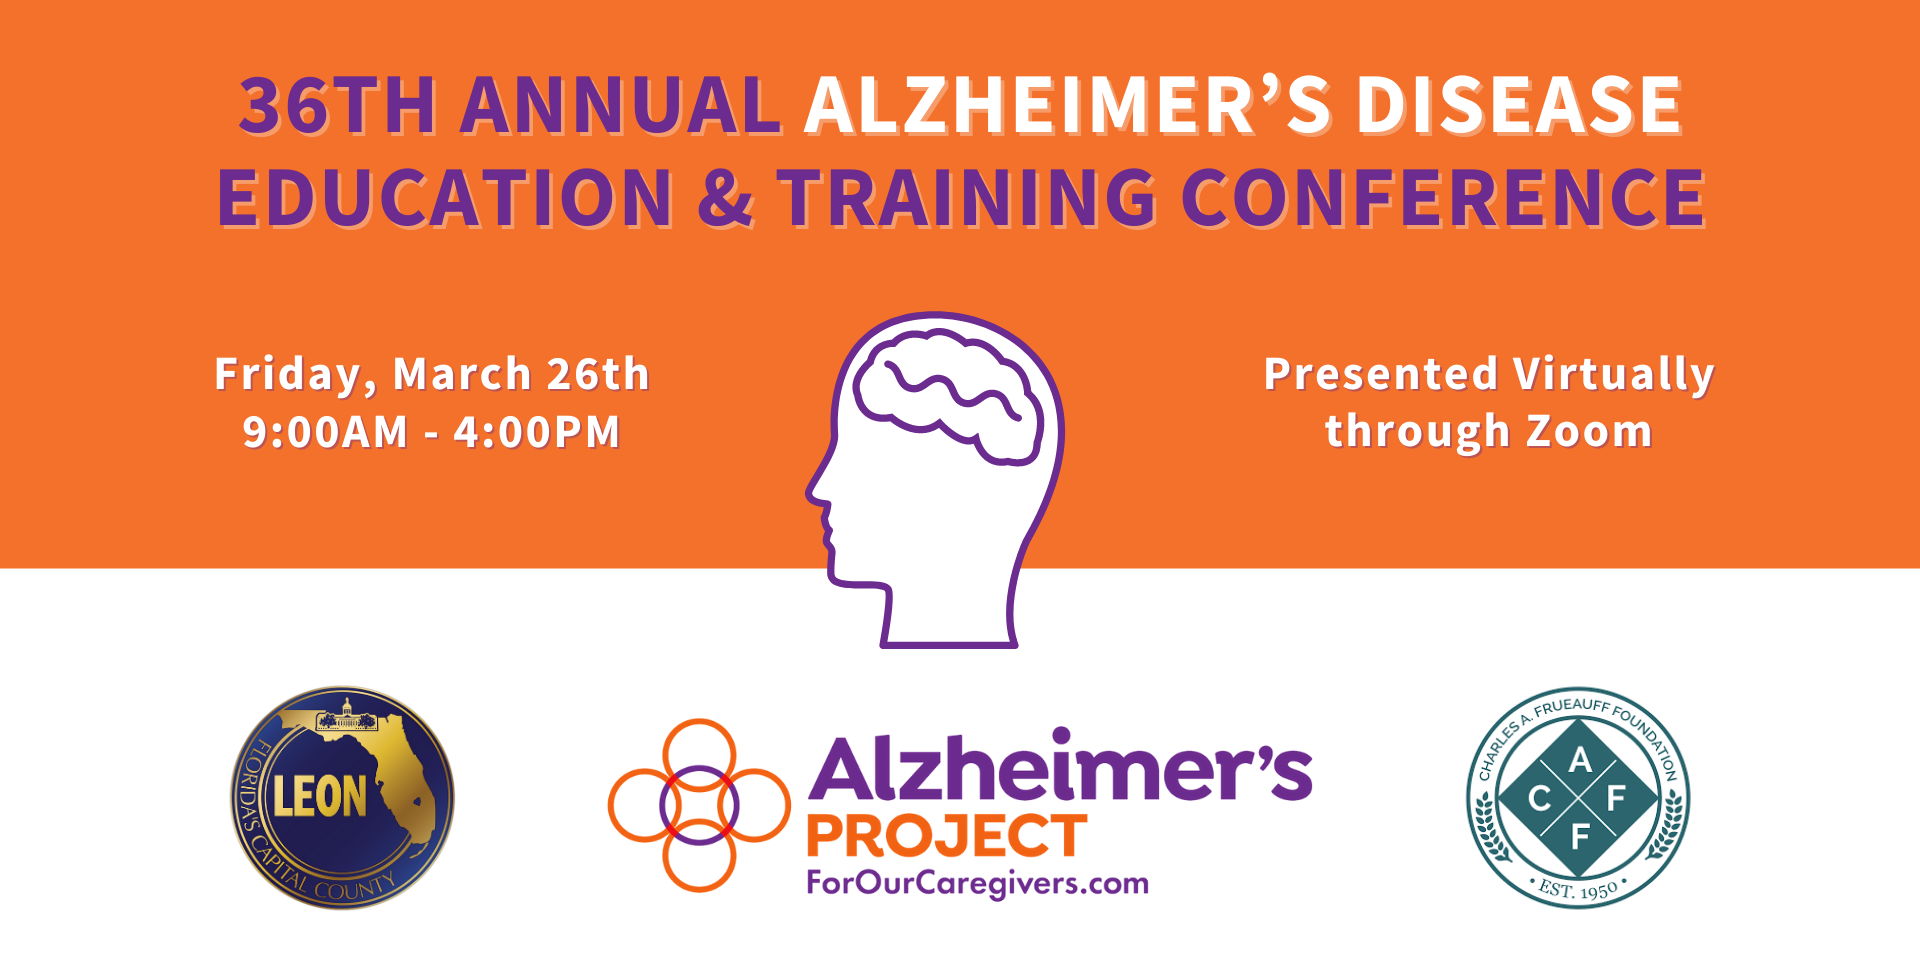 36th Annual Alzheimer's Disease Education & Training Conference promotional image